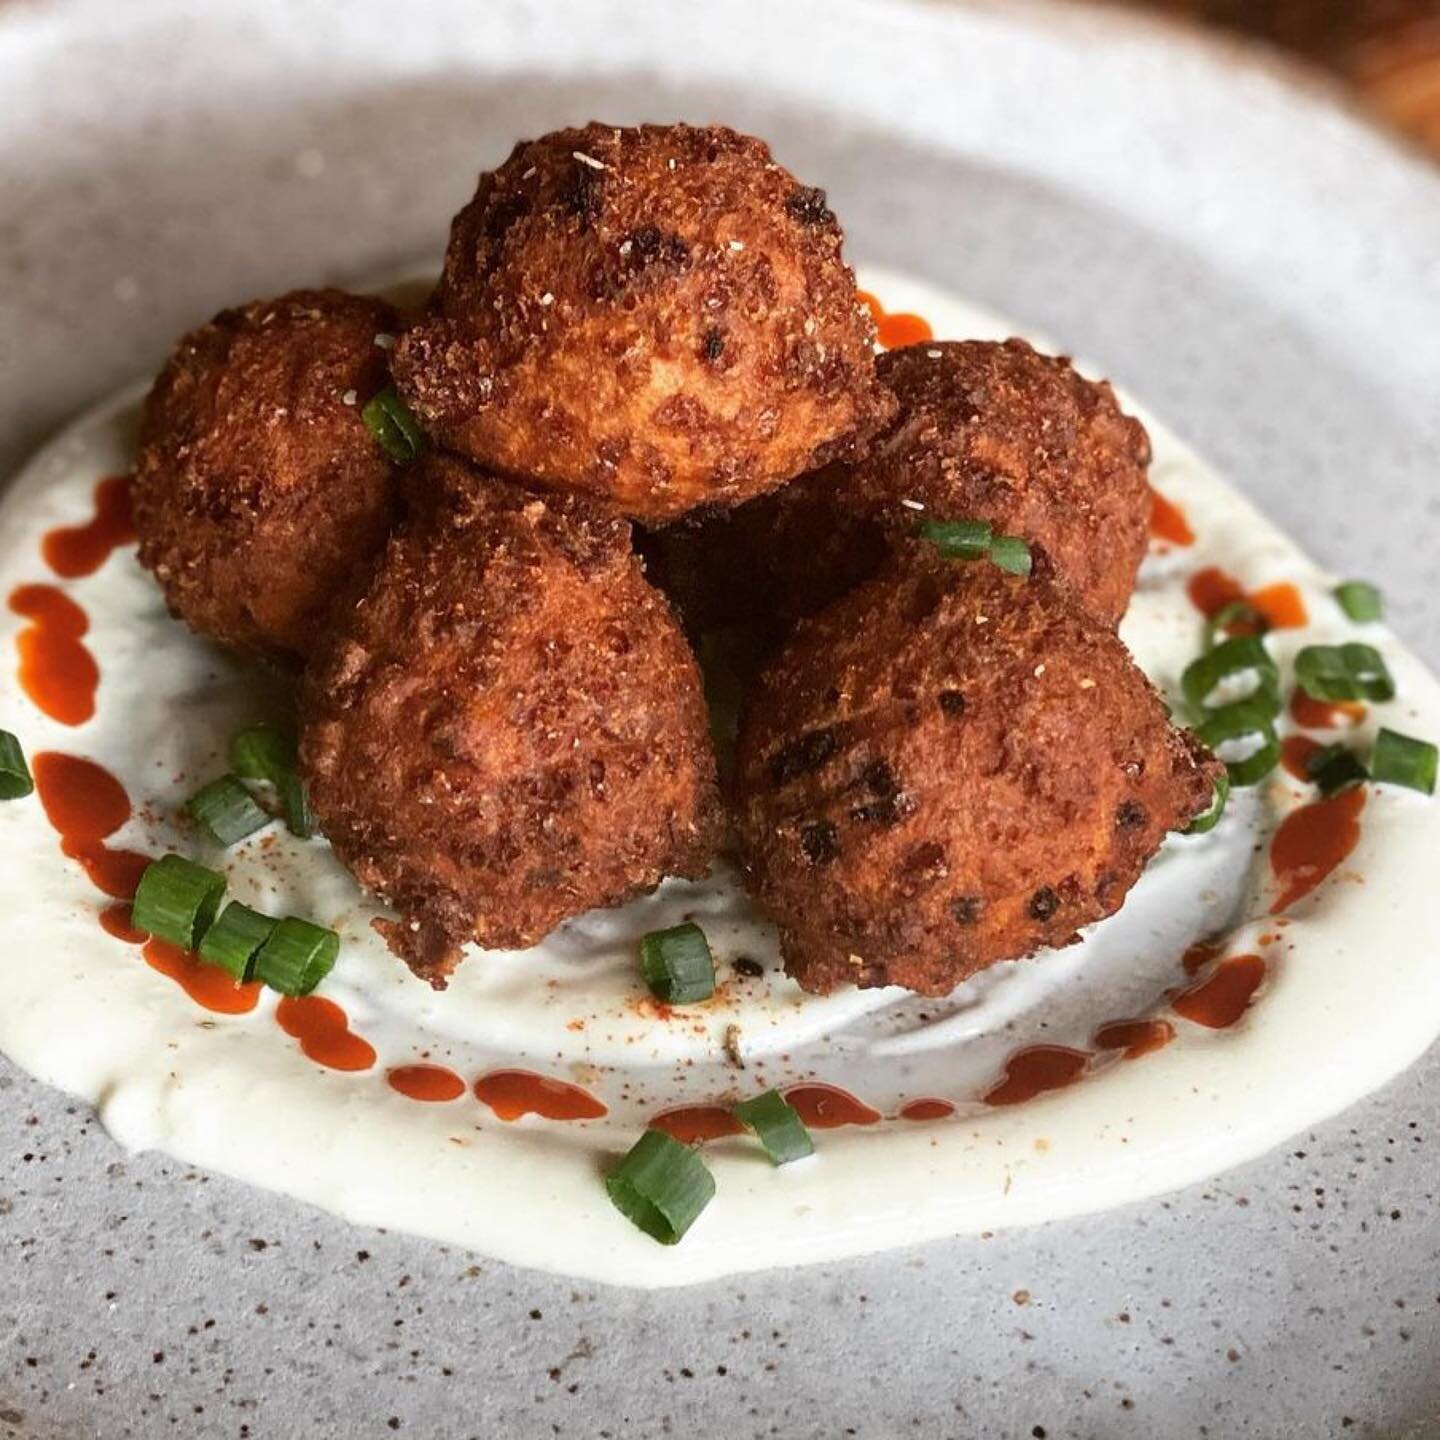 Pimento Cheese hushpuppies with malted Mayo and smoked Valentina hot sauce on @summertrianglepottery is back on the #LTcommunityhour menu !! 

#TeamLT #LTcommunityhour #pimentocheese #hushpuppies #maltmayo #eastnashville #nashville #foodphotography #